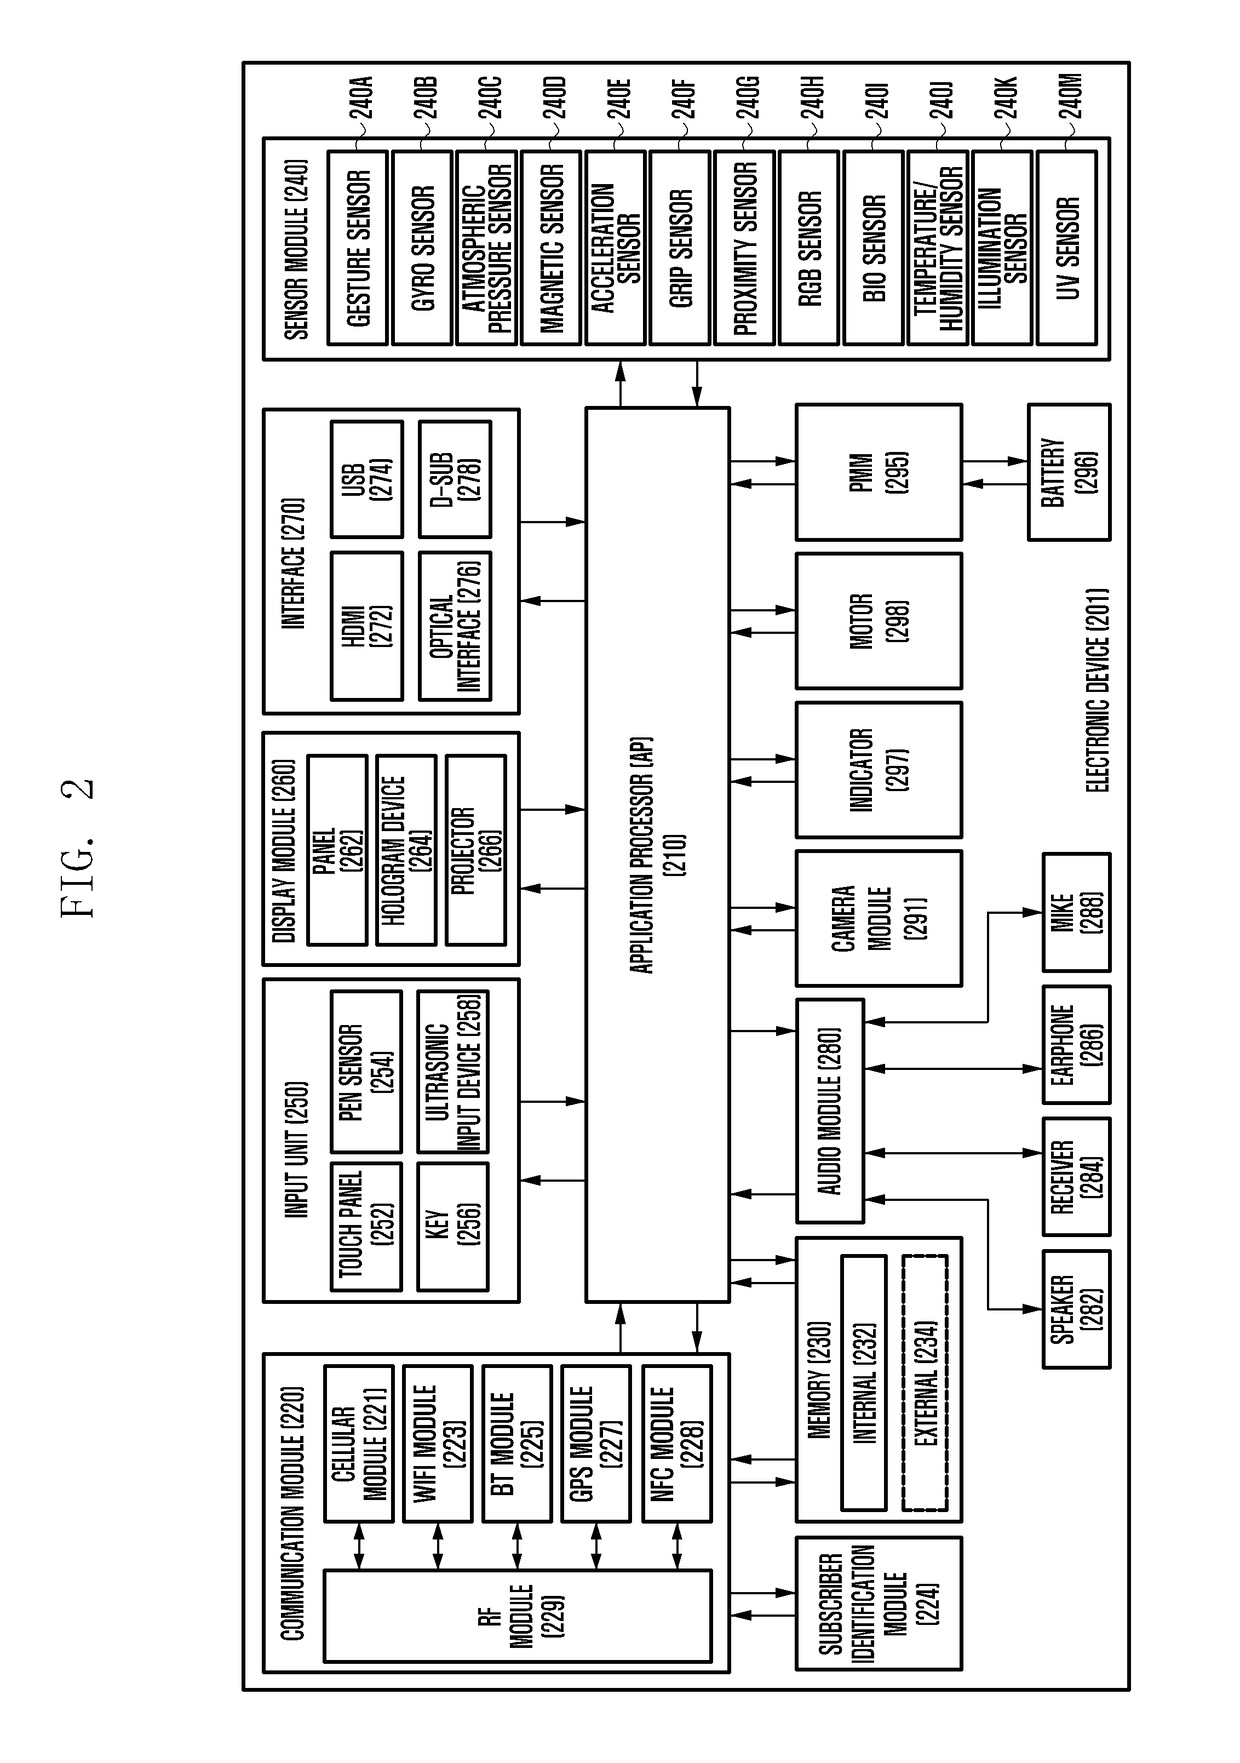 Display controlling method and electronic device adapted to the same